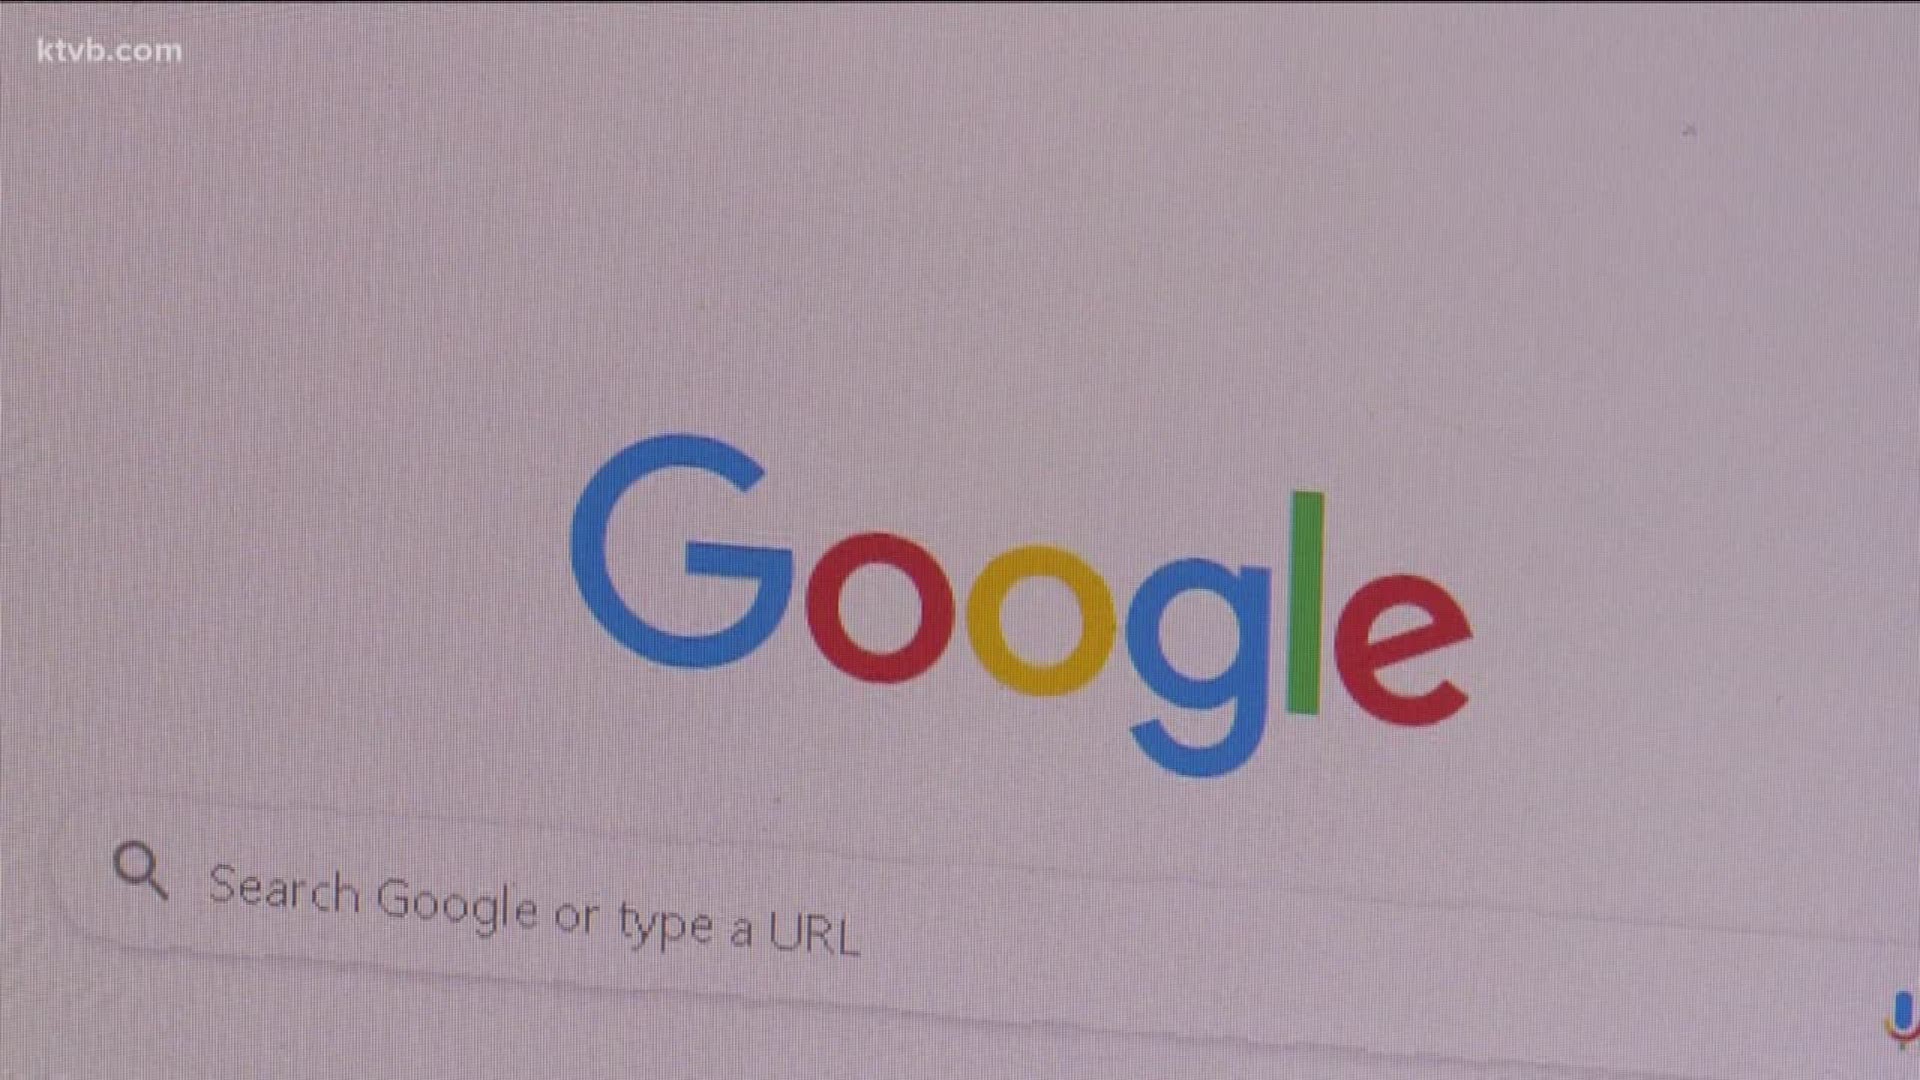 Representatives from the tech-giant are in Boise and they are offering free one-on-one tech support and training for Idahoans. It's called "Grow with Google," a partnership between Google and the American Library Association.